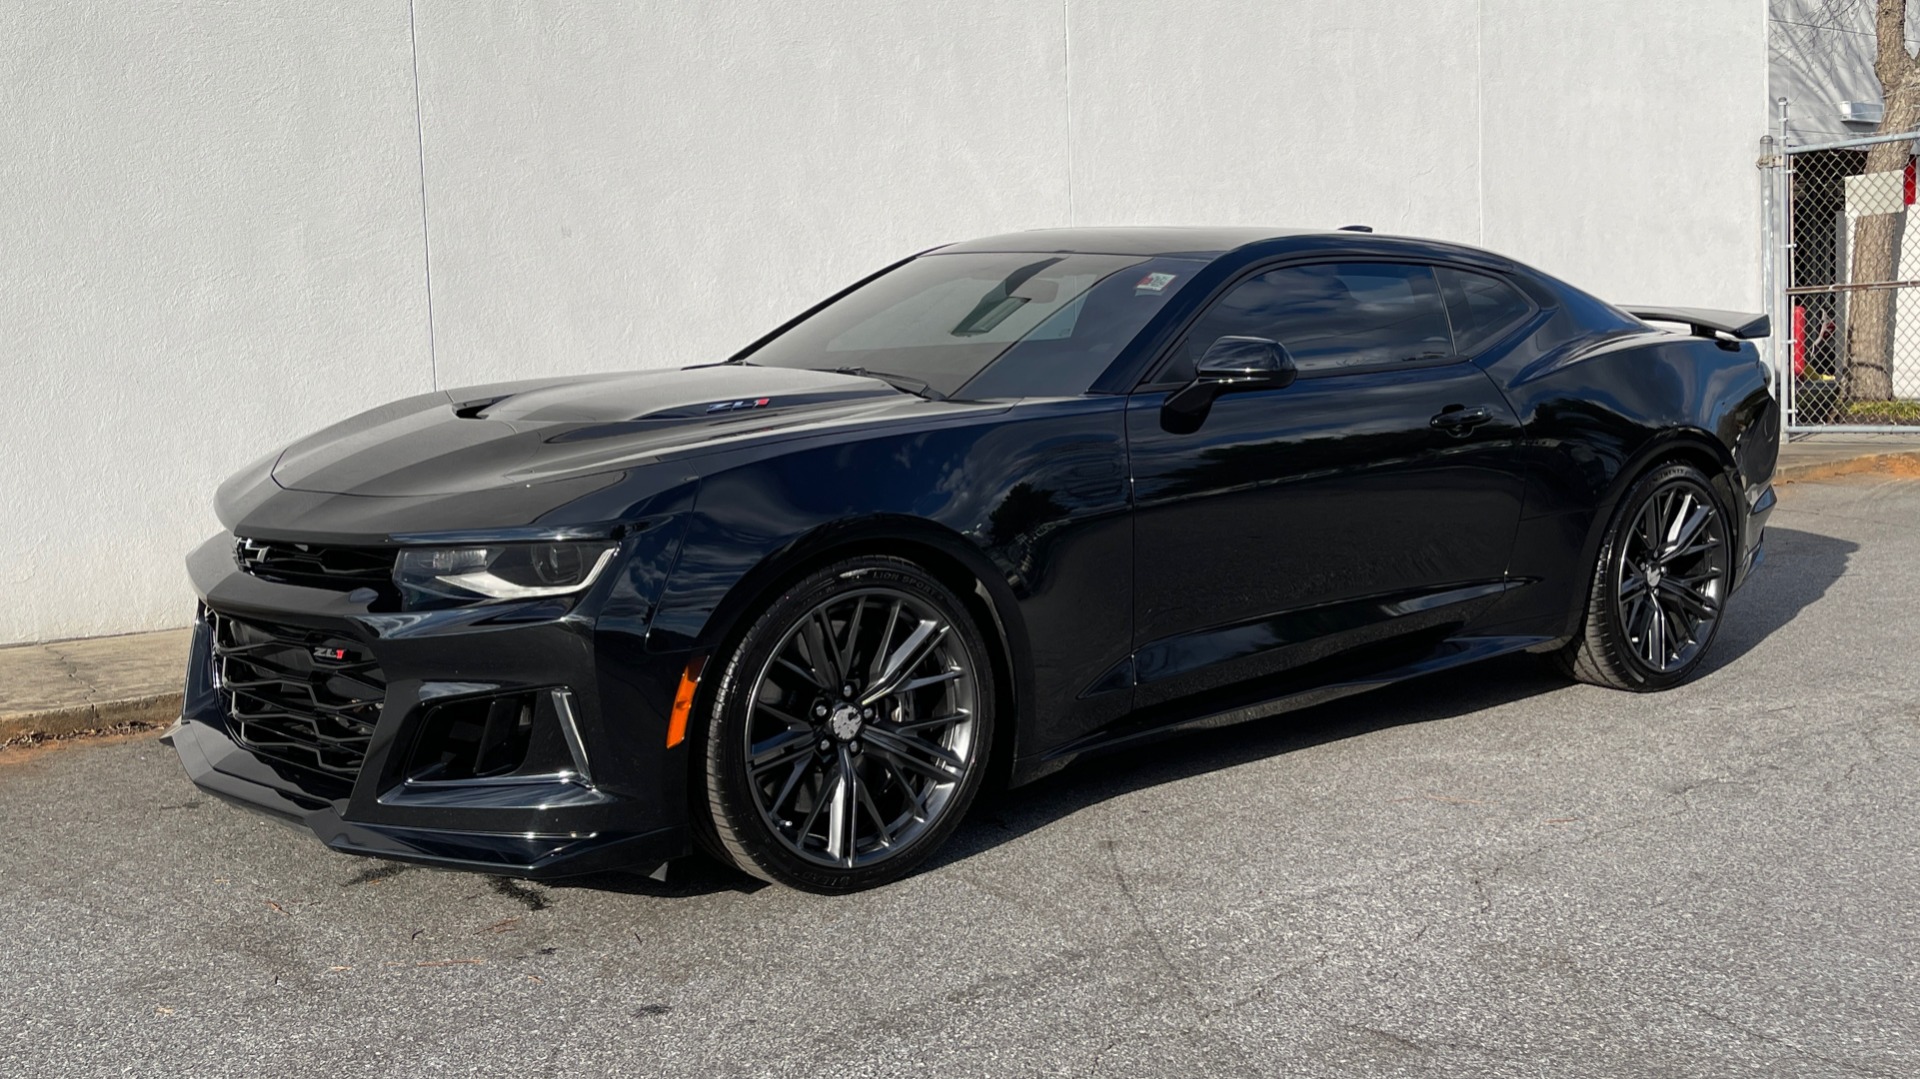 Used 2019 Chevrolet Camaro ZL1 650HP COUPE / 10-SPD AUTO / SUNROOF / BOSE / DATA RECORDER for sale Sold at Formula Imports in Charlotte NC 28227 2